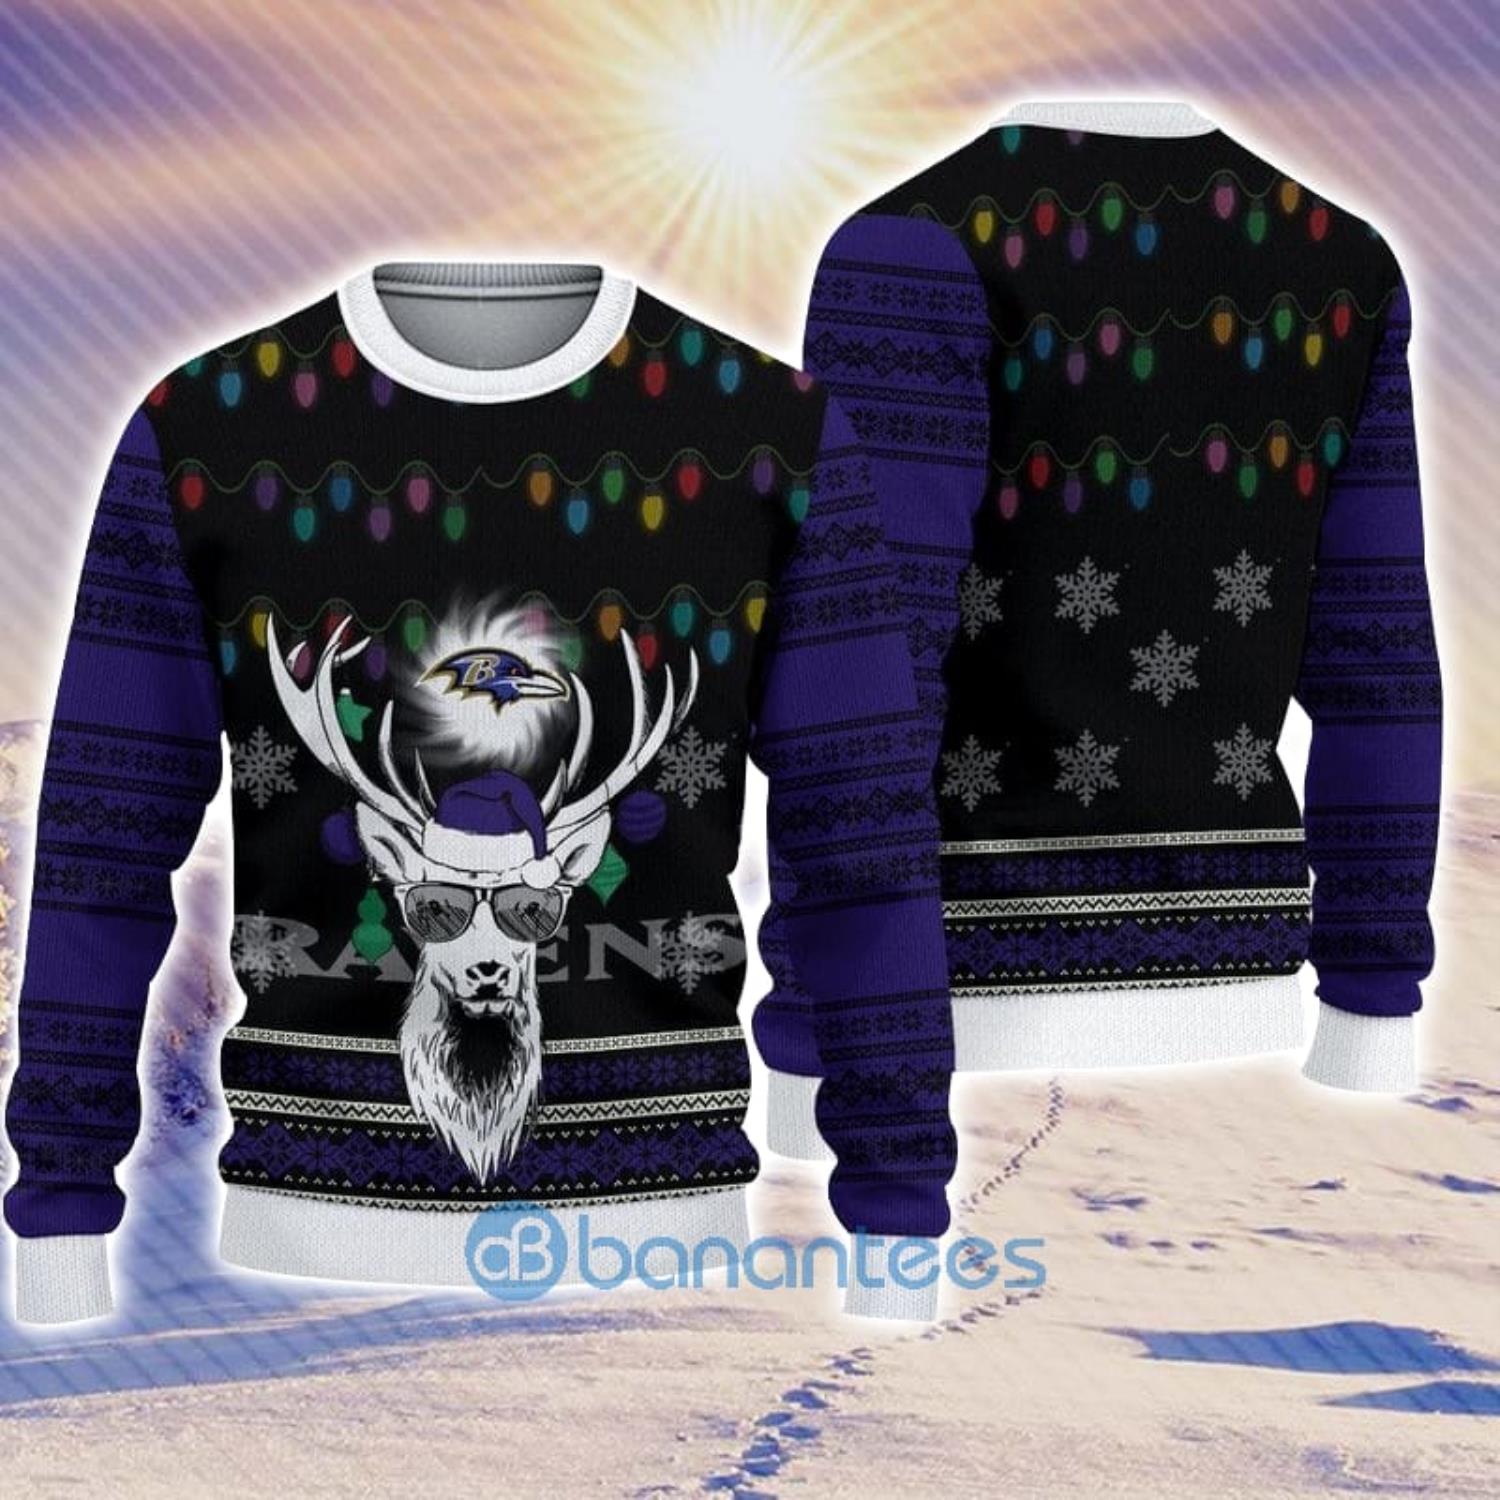 Baltimore Ravens Christmas Cool Reindeer 3D Ugly Christmas Sweater For Fans  - Banantees